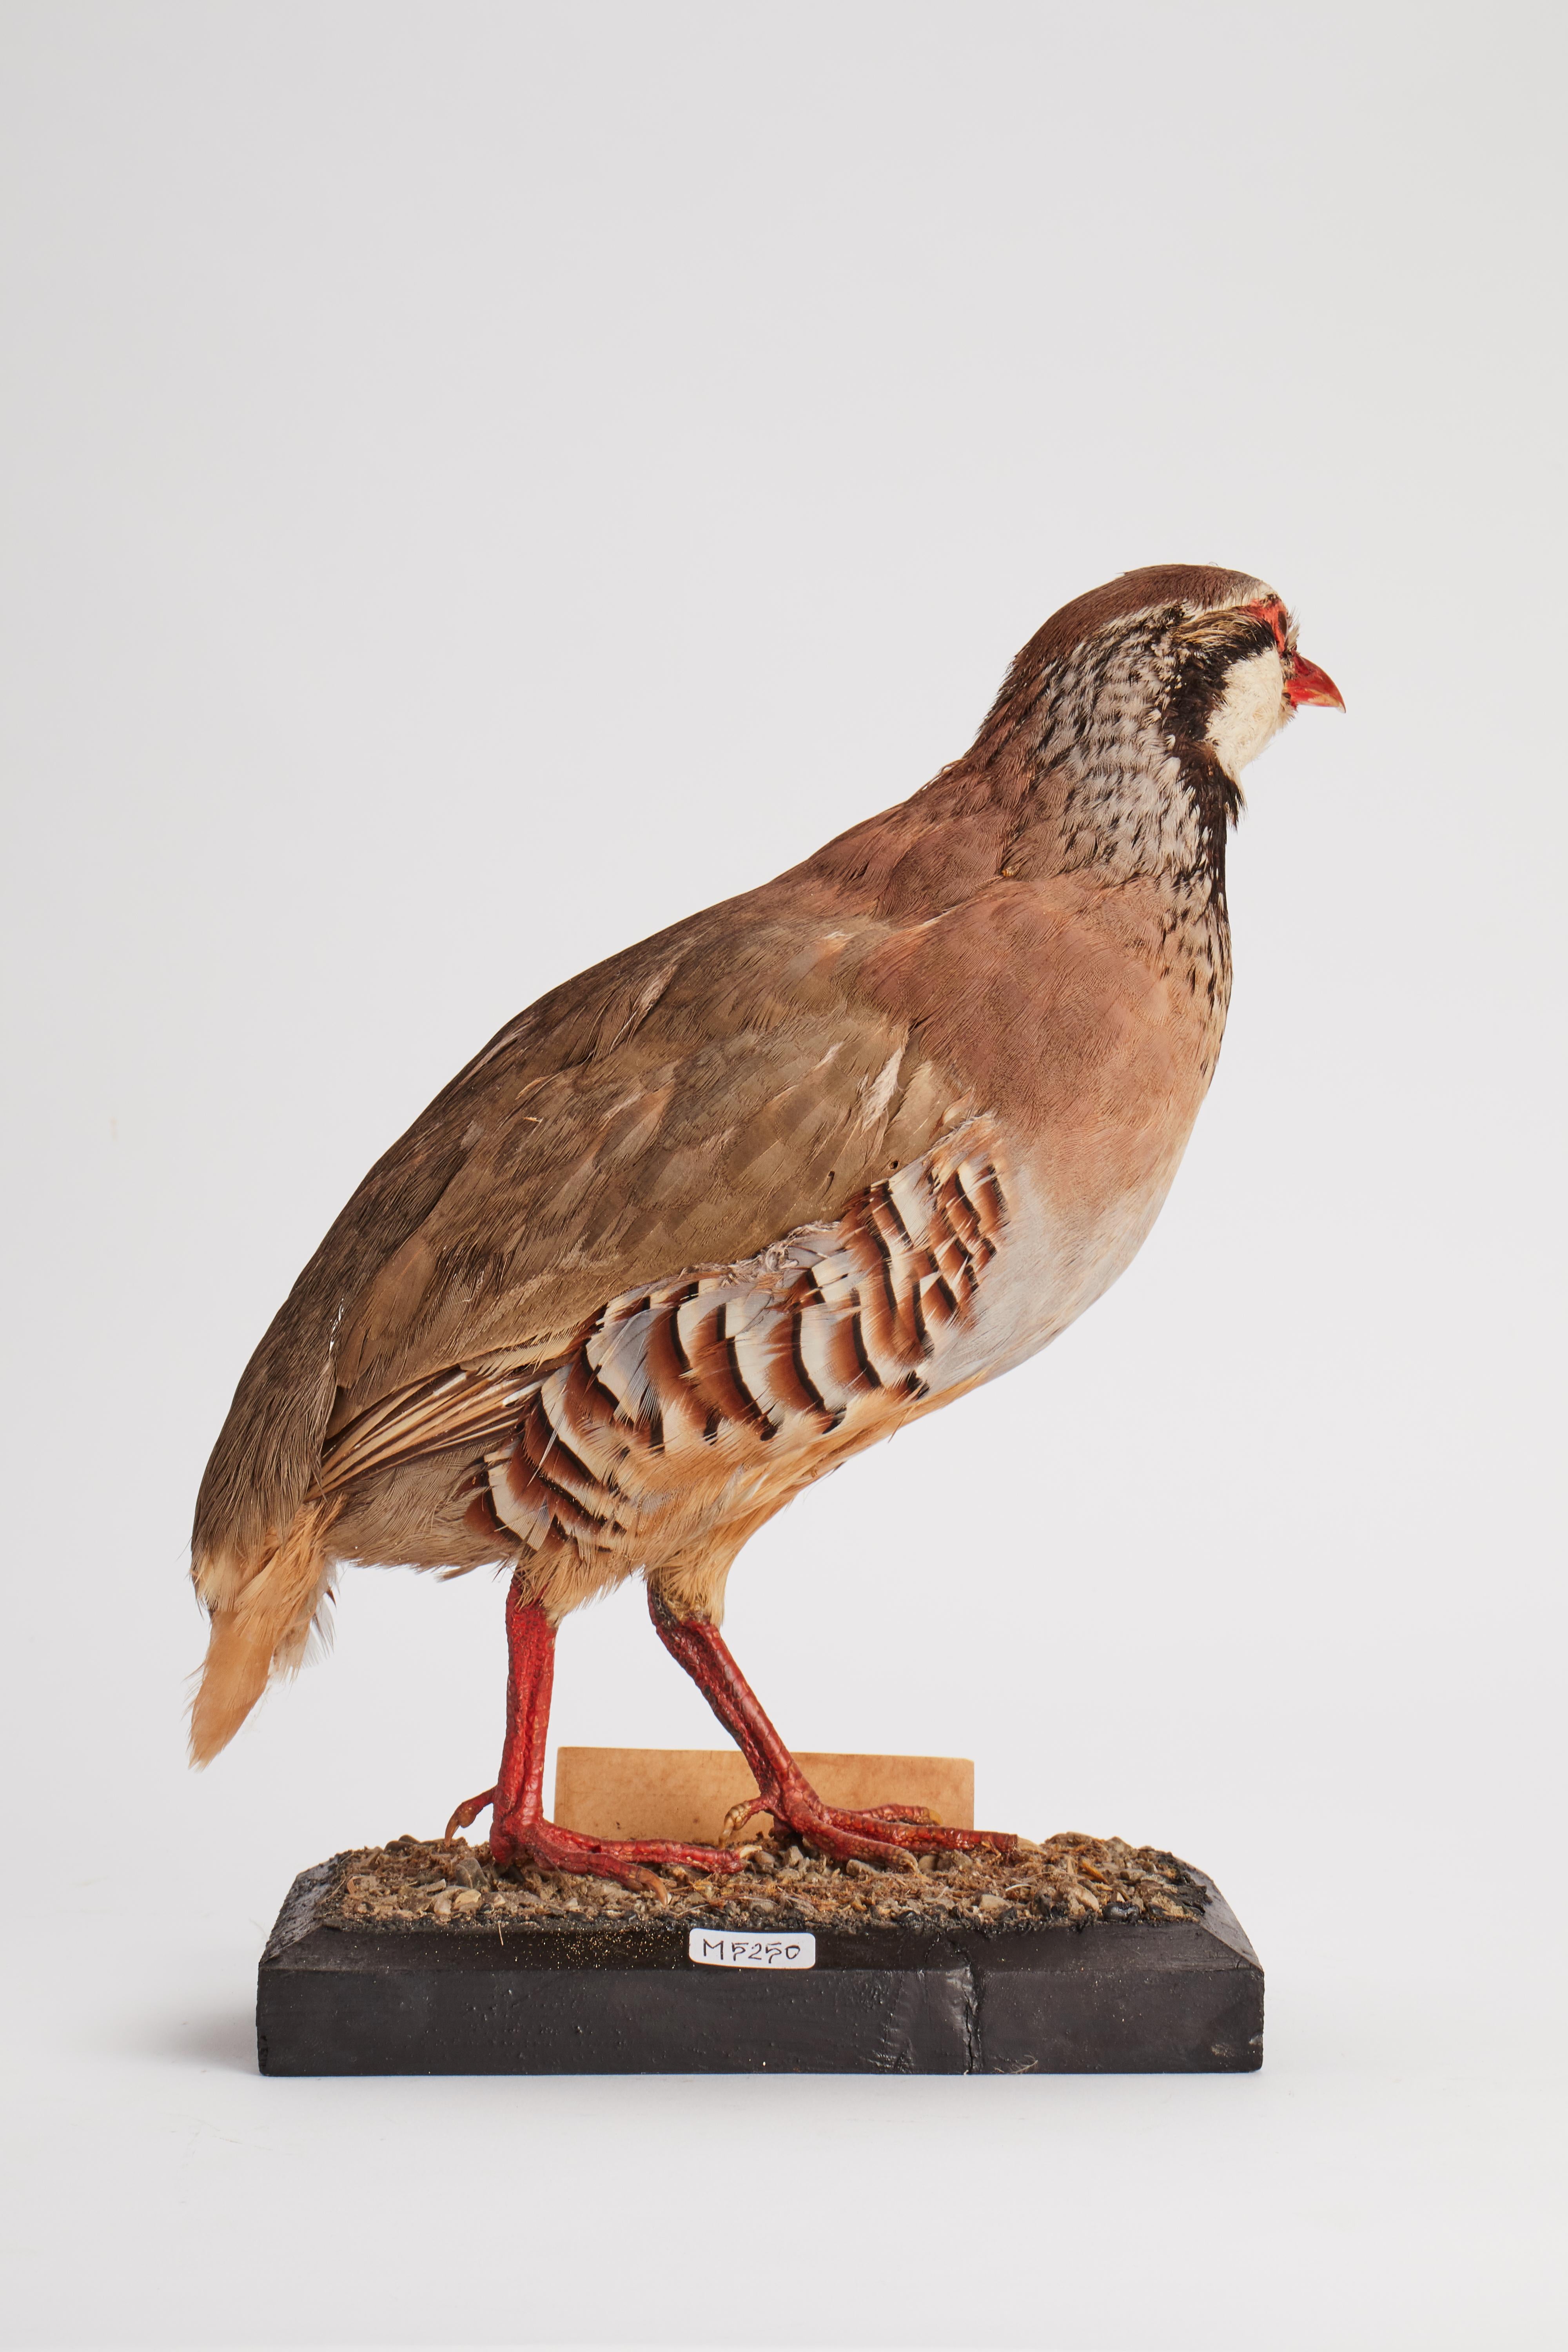 Late 19th Century Stuffed Bird for Natural History Cabinet, Siena, Italy, 1880